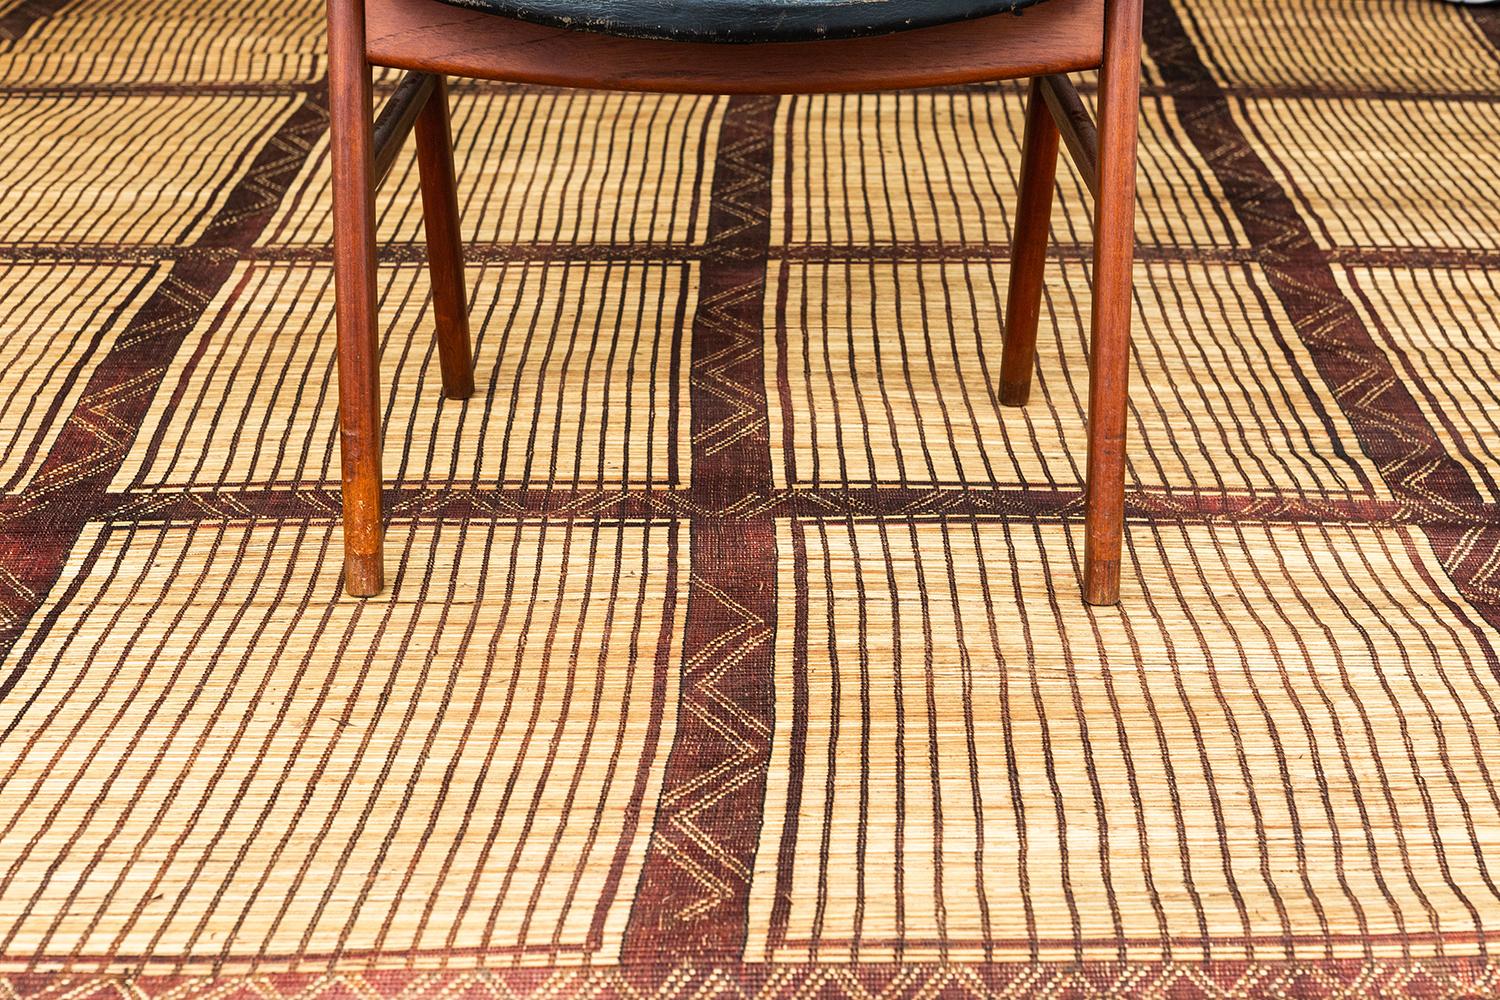 A beautiful and unique vintage Tuareg. This piece is handwoven of reed and leather by one of the oldest nomadic groups of the Saharan trade routes, the Tuaregs. This piece will elevate any design space with its tribal design and eye catching texture.